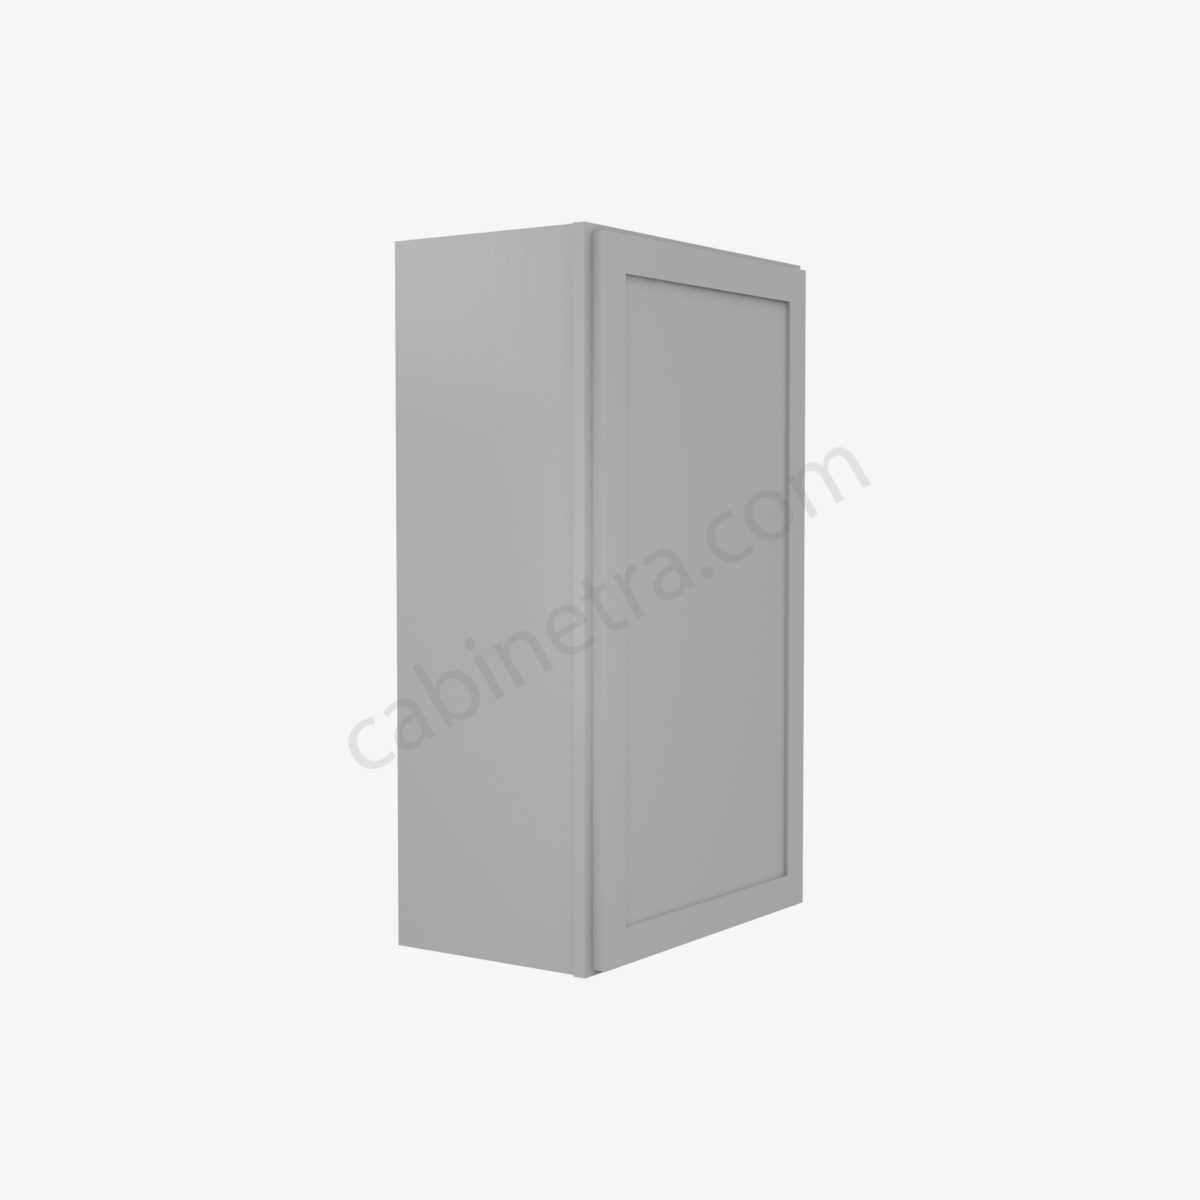 AB W2136 4 Forevermark Lait Gray Shaker Cabinetra scaled